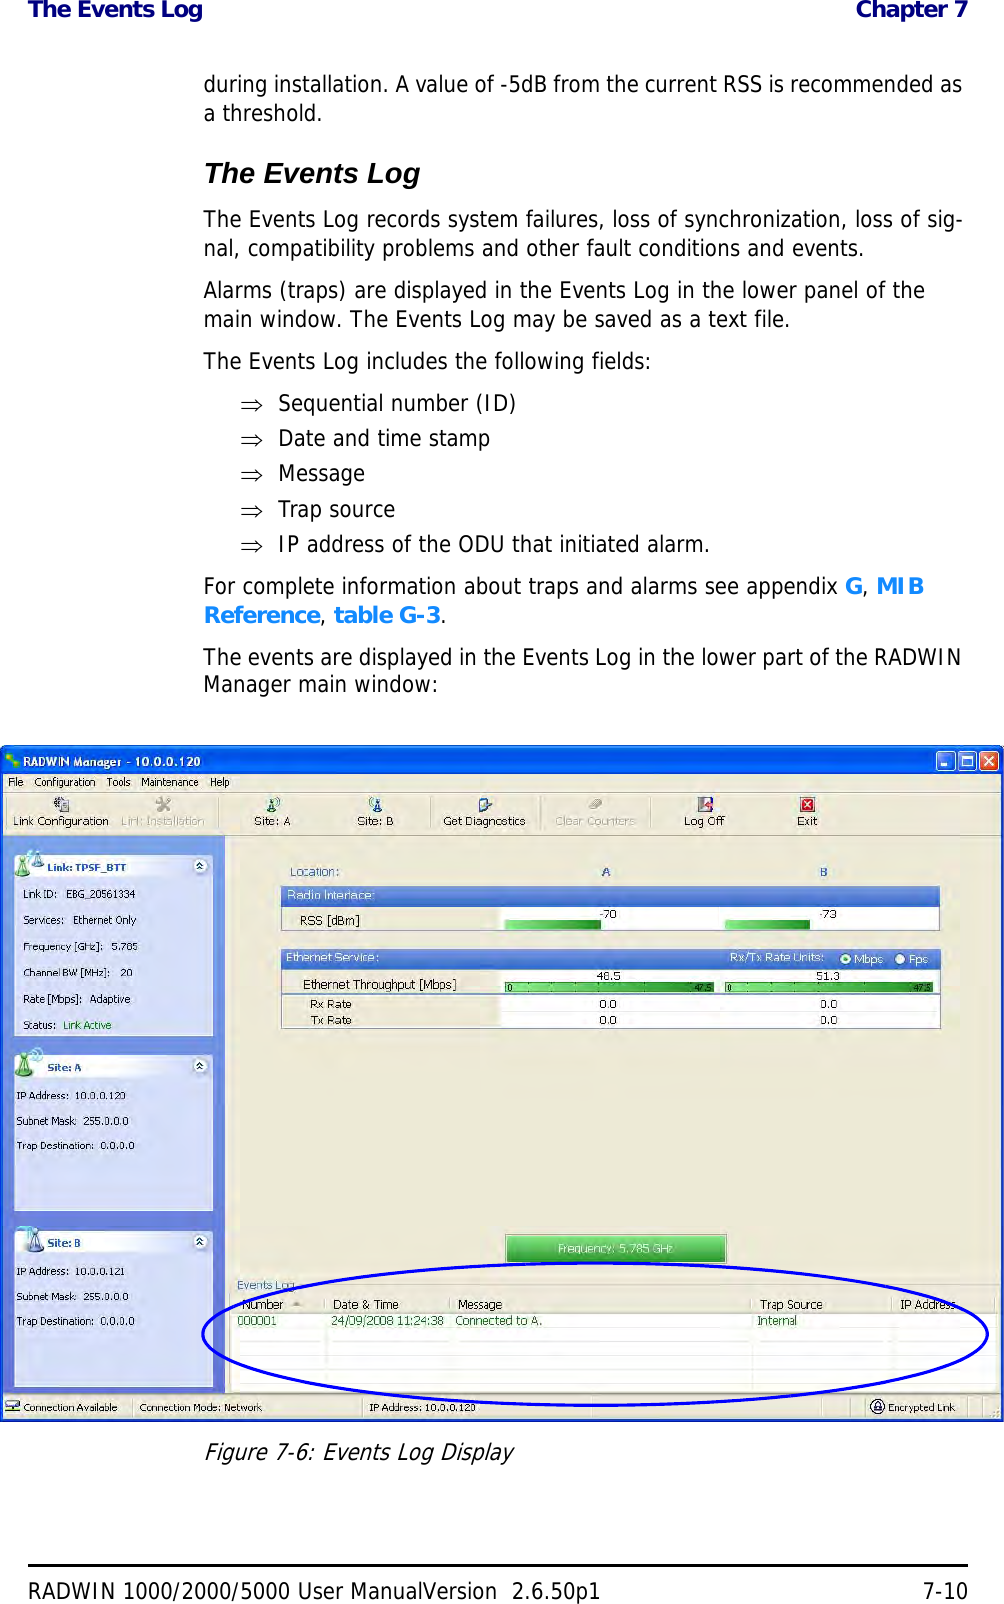 The Events Log  Chapter 7RADWIN 1000/2000/5000 User ManualVersion  2.6.50p1 7-10during installation. A value of -5dB from the current RSS is recommended as a threshold.The Events LogThe Events Log records system failures, loss of synchronization, loss of sig-nal, compatibility problems and other fault conditions and events.Alarms (traps) are displayed in the Events Log in the lower panel of the main window. The Events Log may be saved as a text file.The Events Log includes the following fields:Sequential number (ID)Date and time stampMessageTrap sourceIP address of the ODU that initiated alarm.For complete information about traps and alarms see appendix G, MIB Reference, table G-3.The events are displayed in the Events Log in the lower part of the RADWIN Manager main window:Figure 7-6: Events Log Display